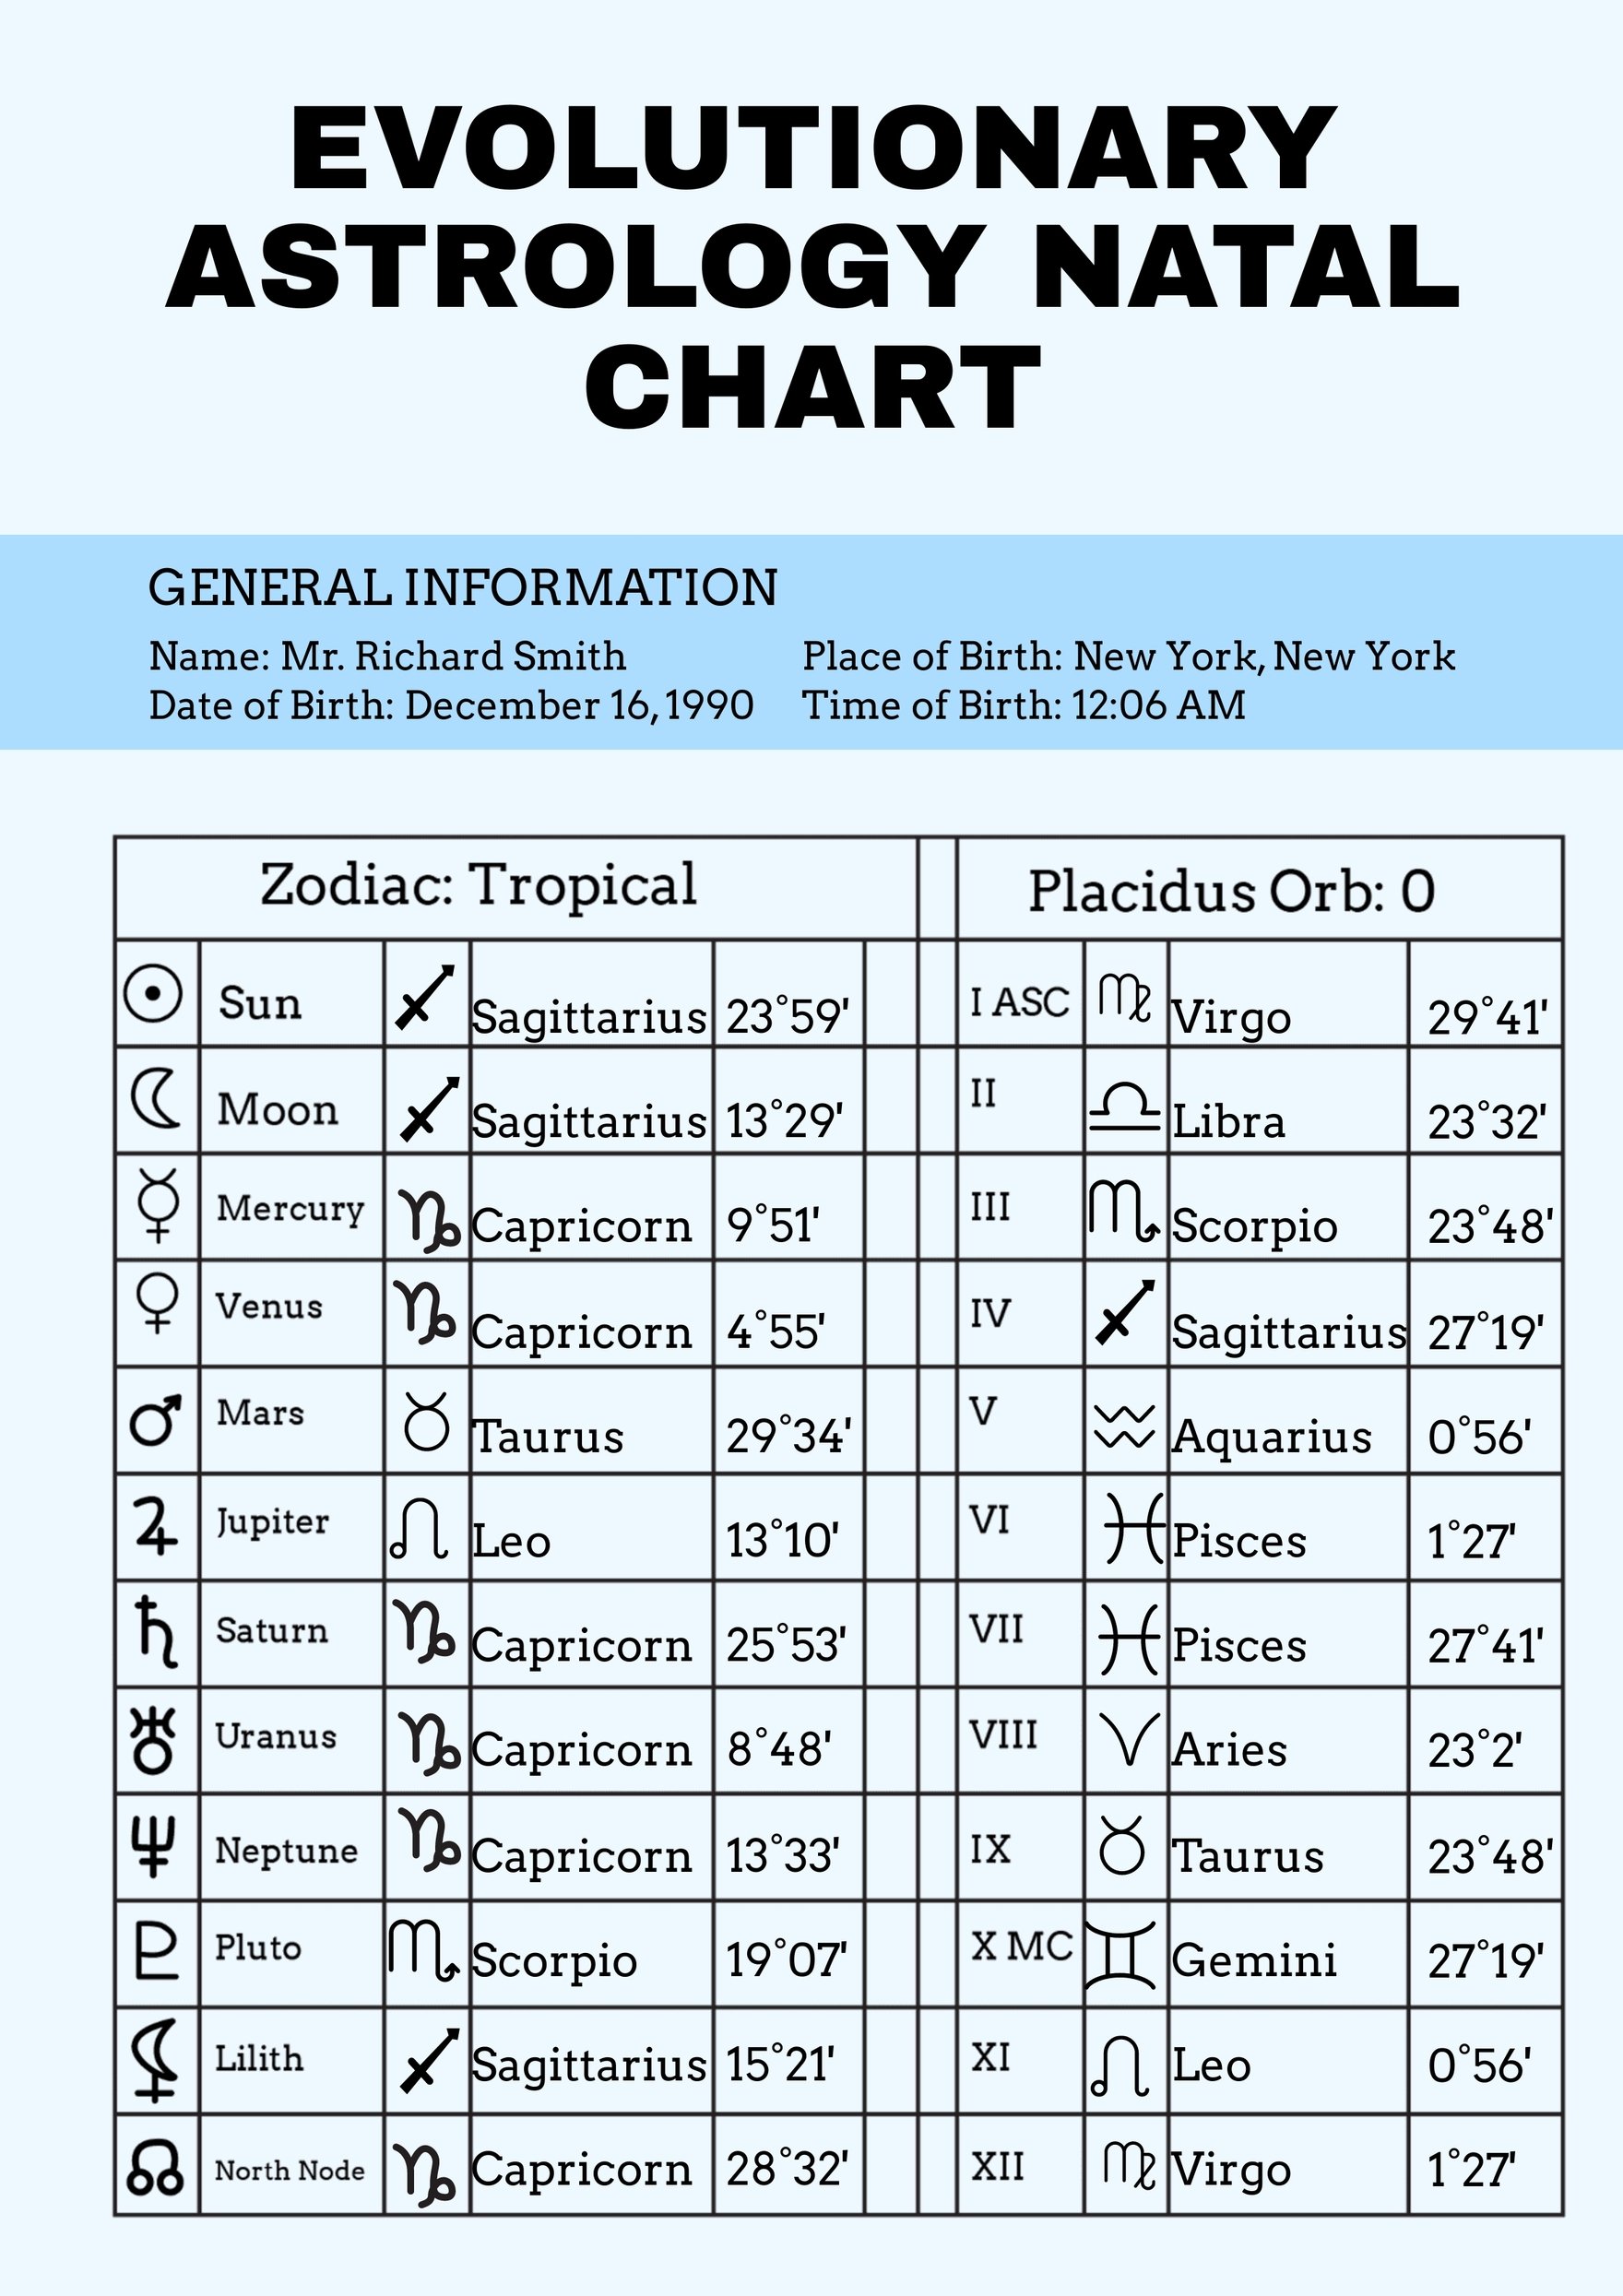 Astrology Chart Template in Google Sheets, Google Slides, Word ...